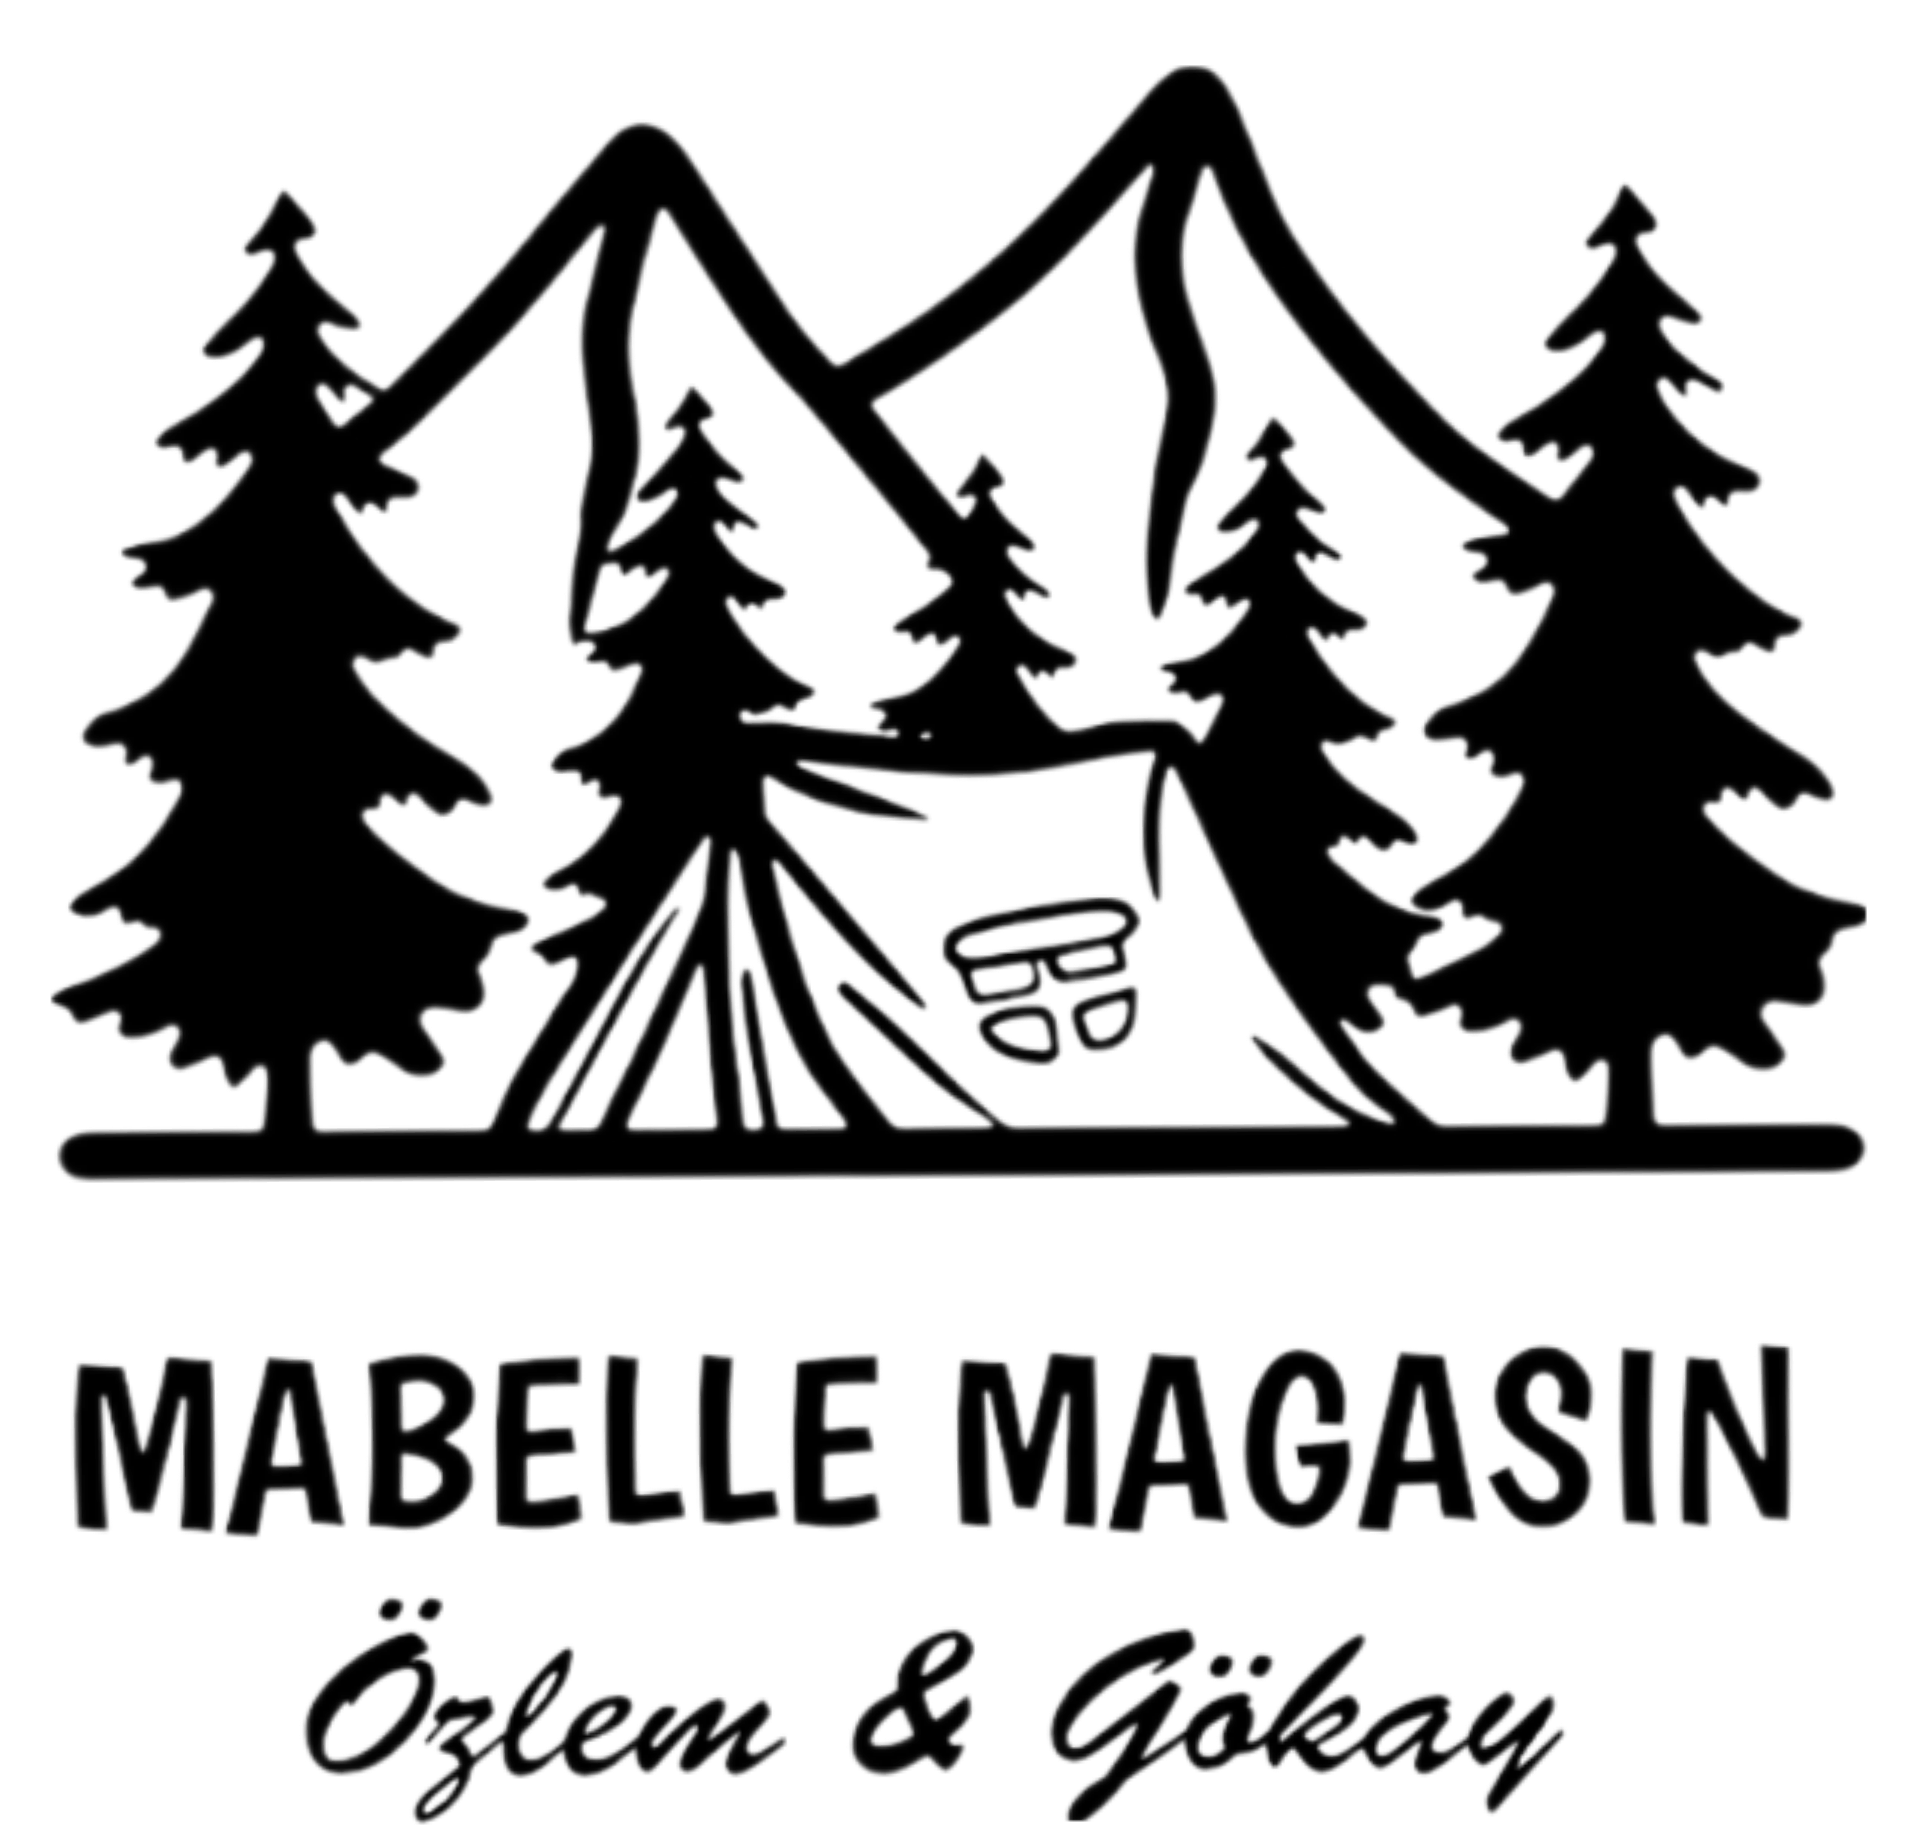 Mabelle Magasin